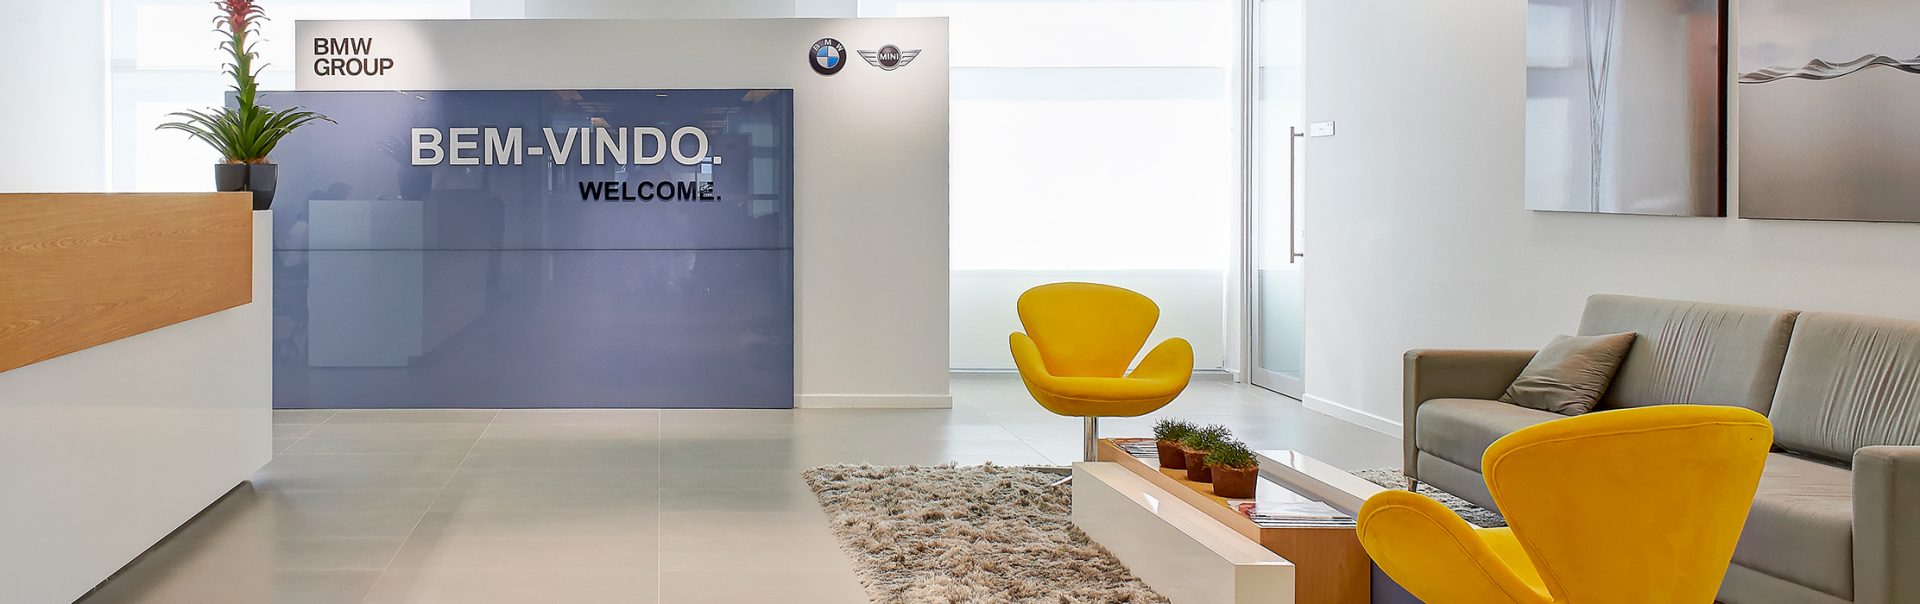 Interior view of the BMW office in Sao Paulo